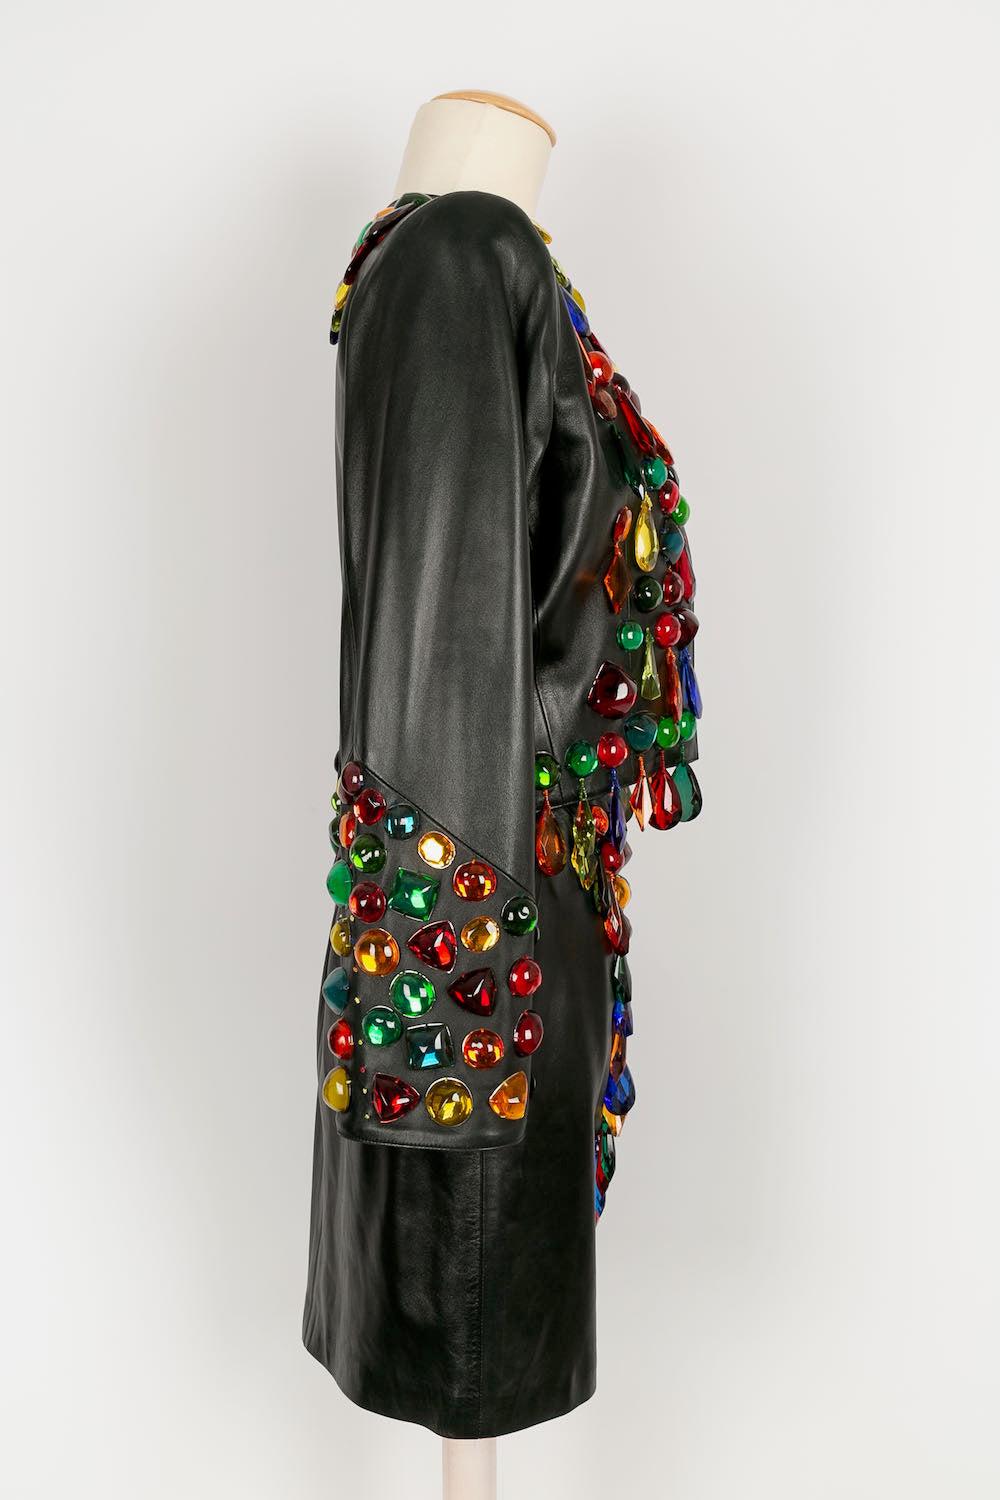 Yves Saint Laurent Leather Suit with Tassels, 1990 For Sale 1